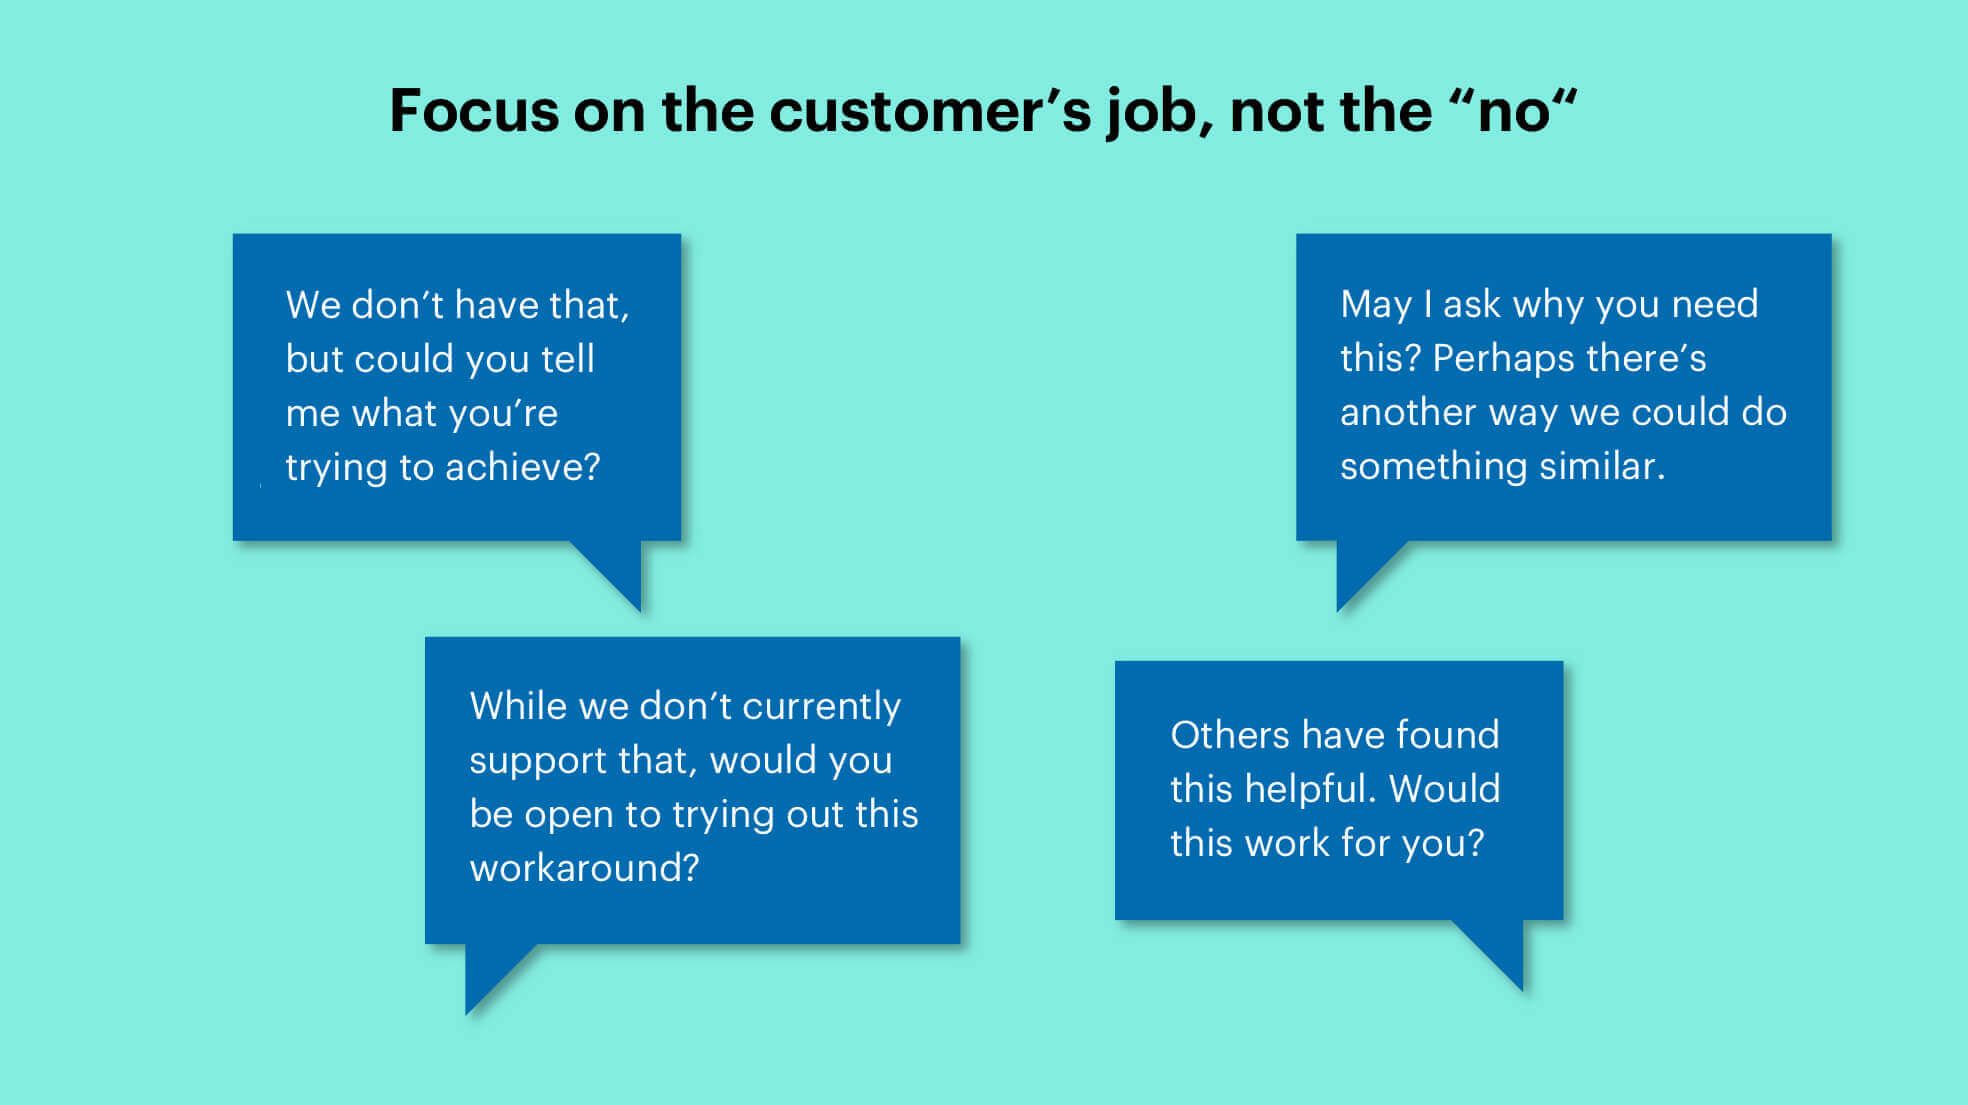 Focus on the customer's job, not the no